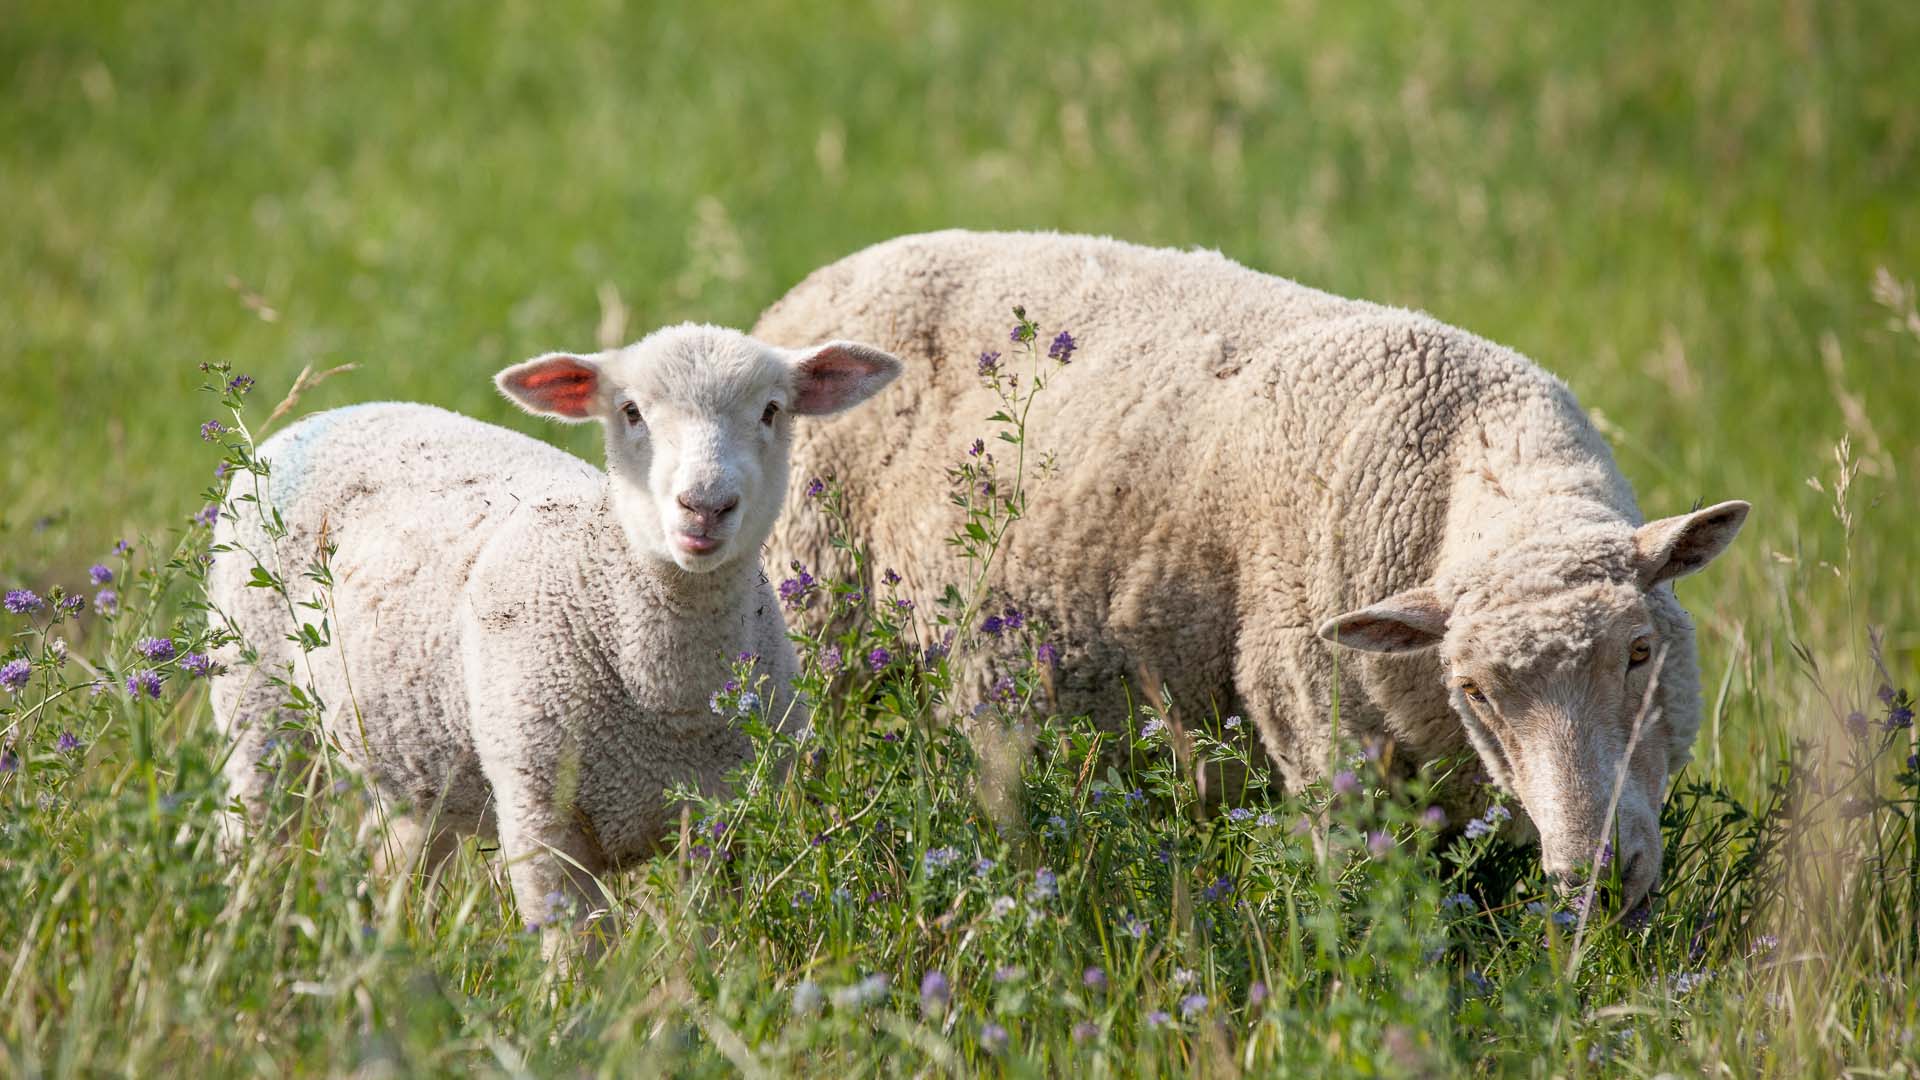 A sheep and a lamb in a grassy field